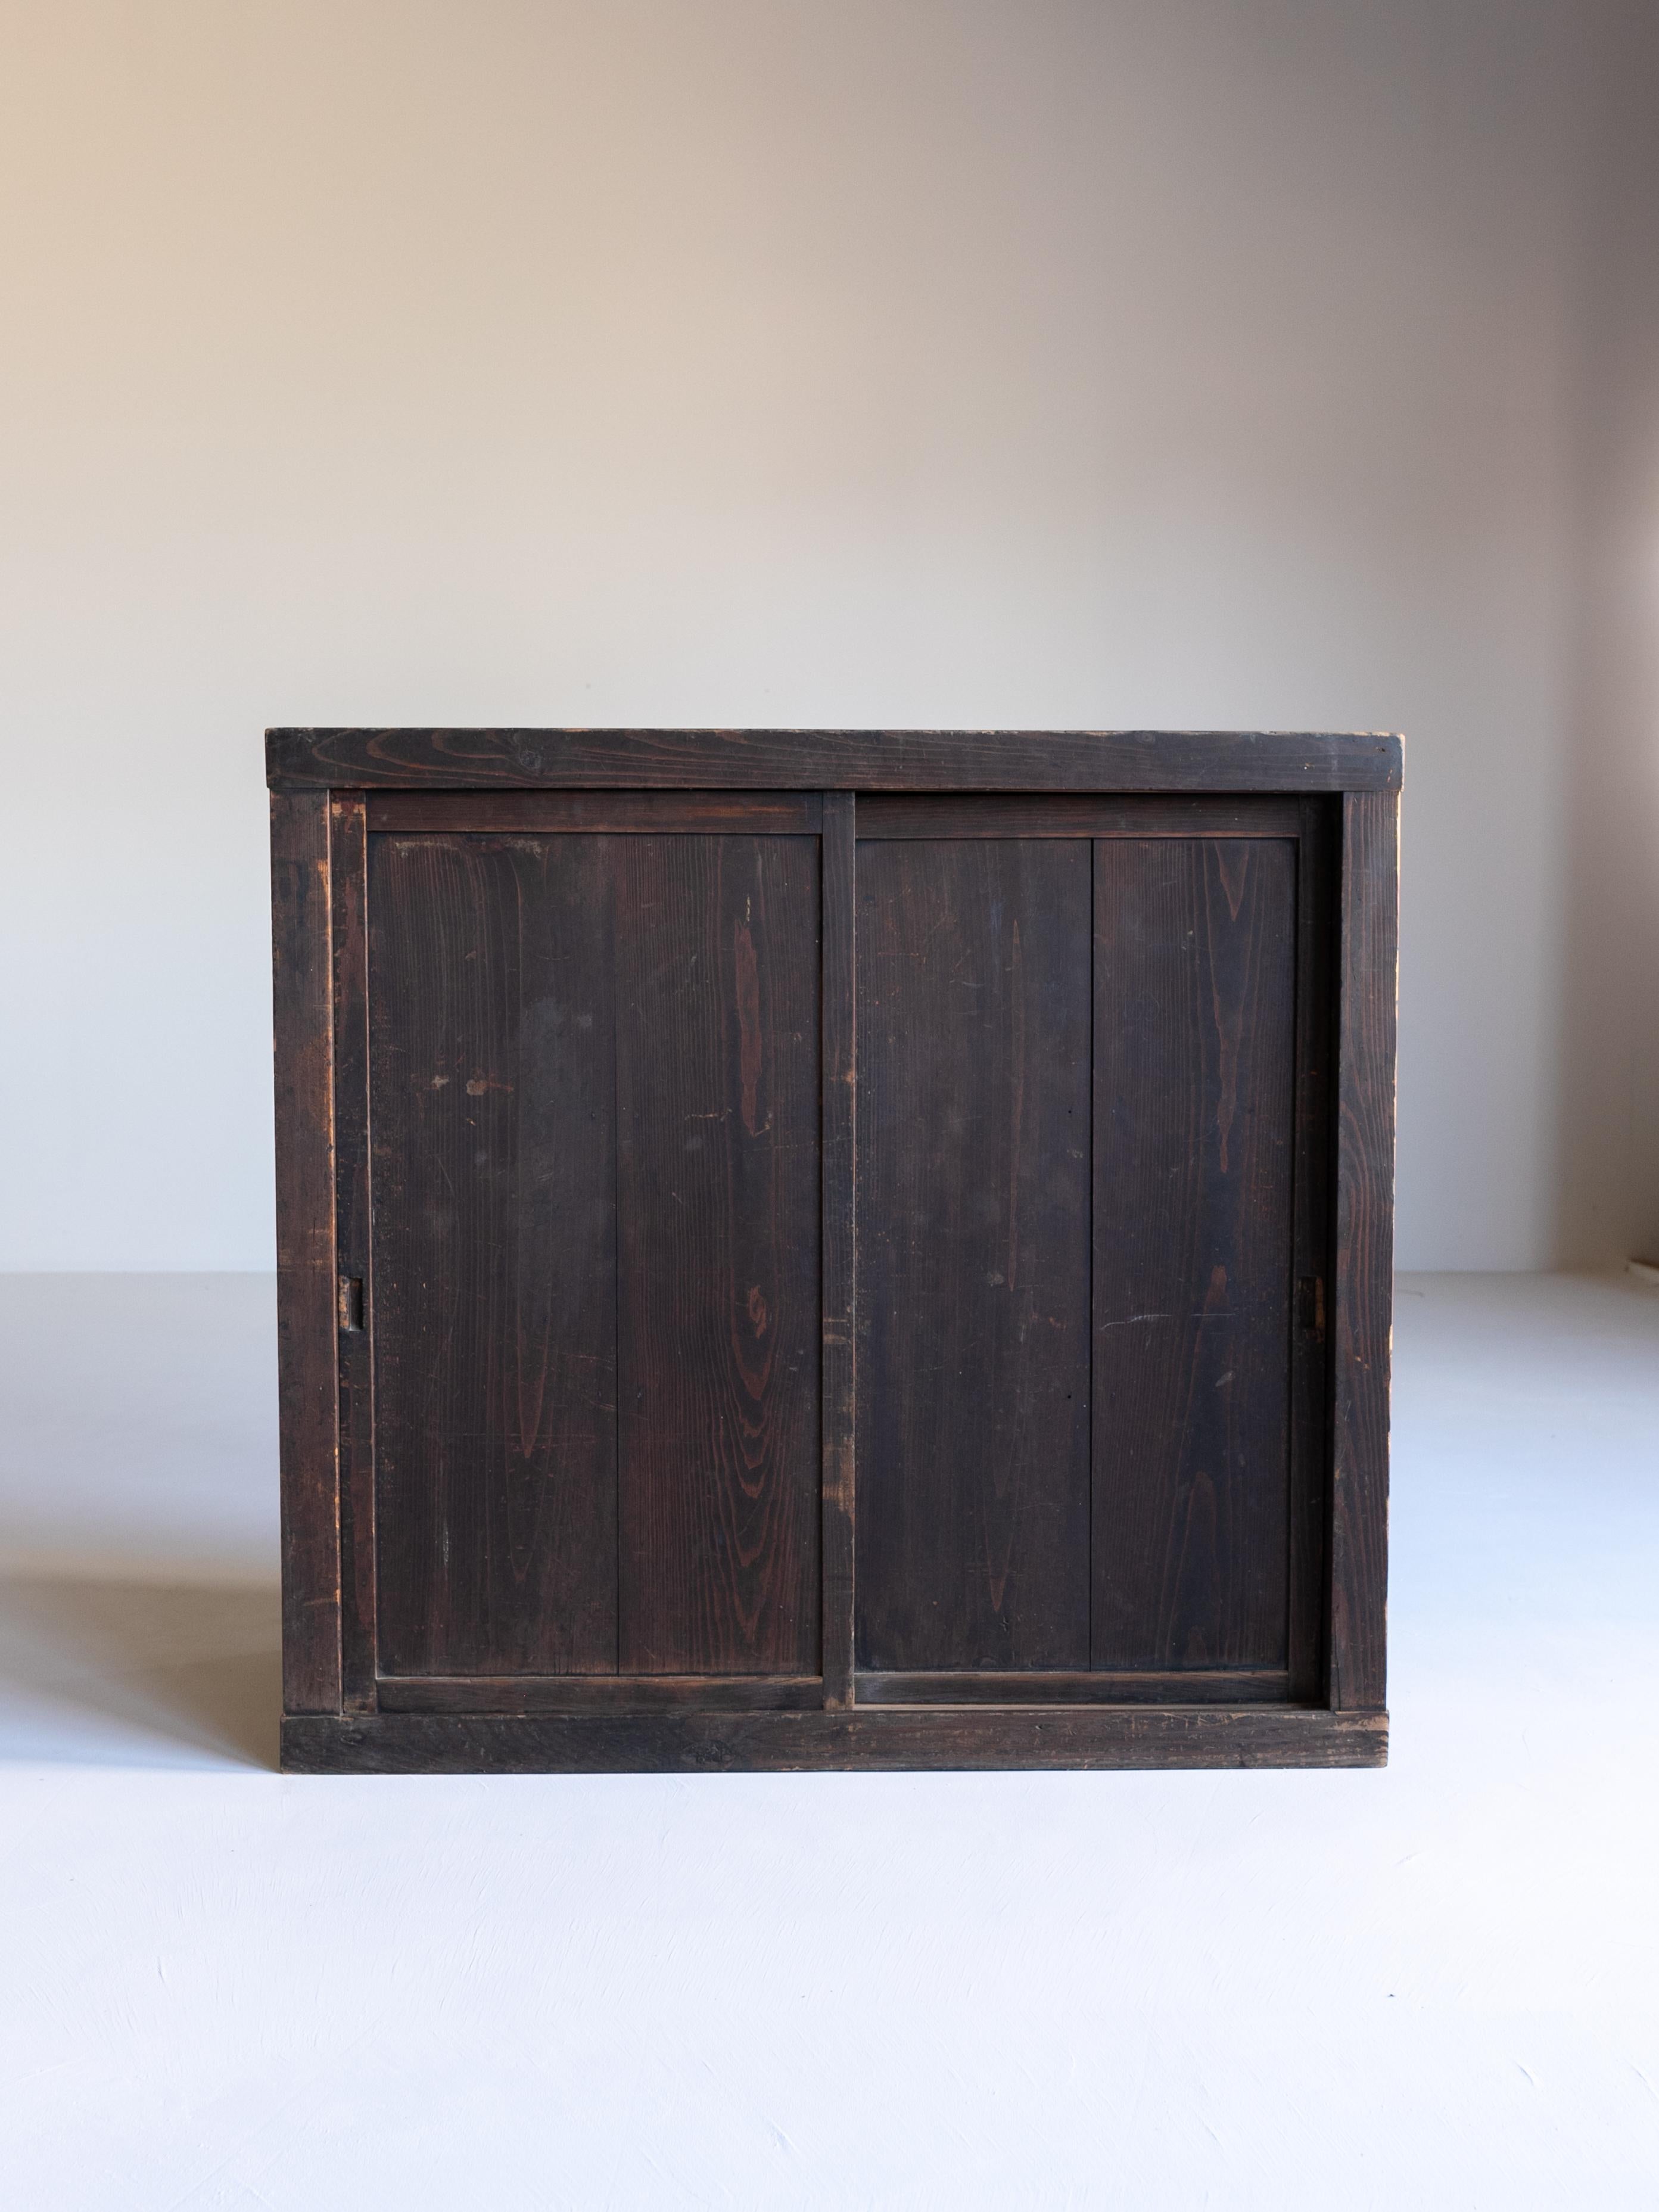 This is a very old Japanese storage cabinet.
This furniture is from the Meiji Period (1860s-1900s).
It is made of cedar wood.

Simple and beautiful, with no extra decoration.
It is the ultimate in simplicity.
The color is also